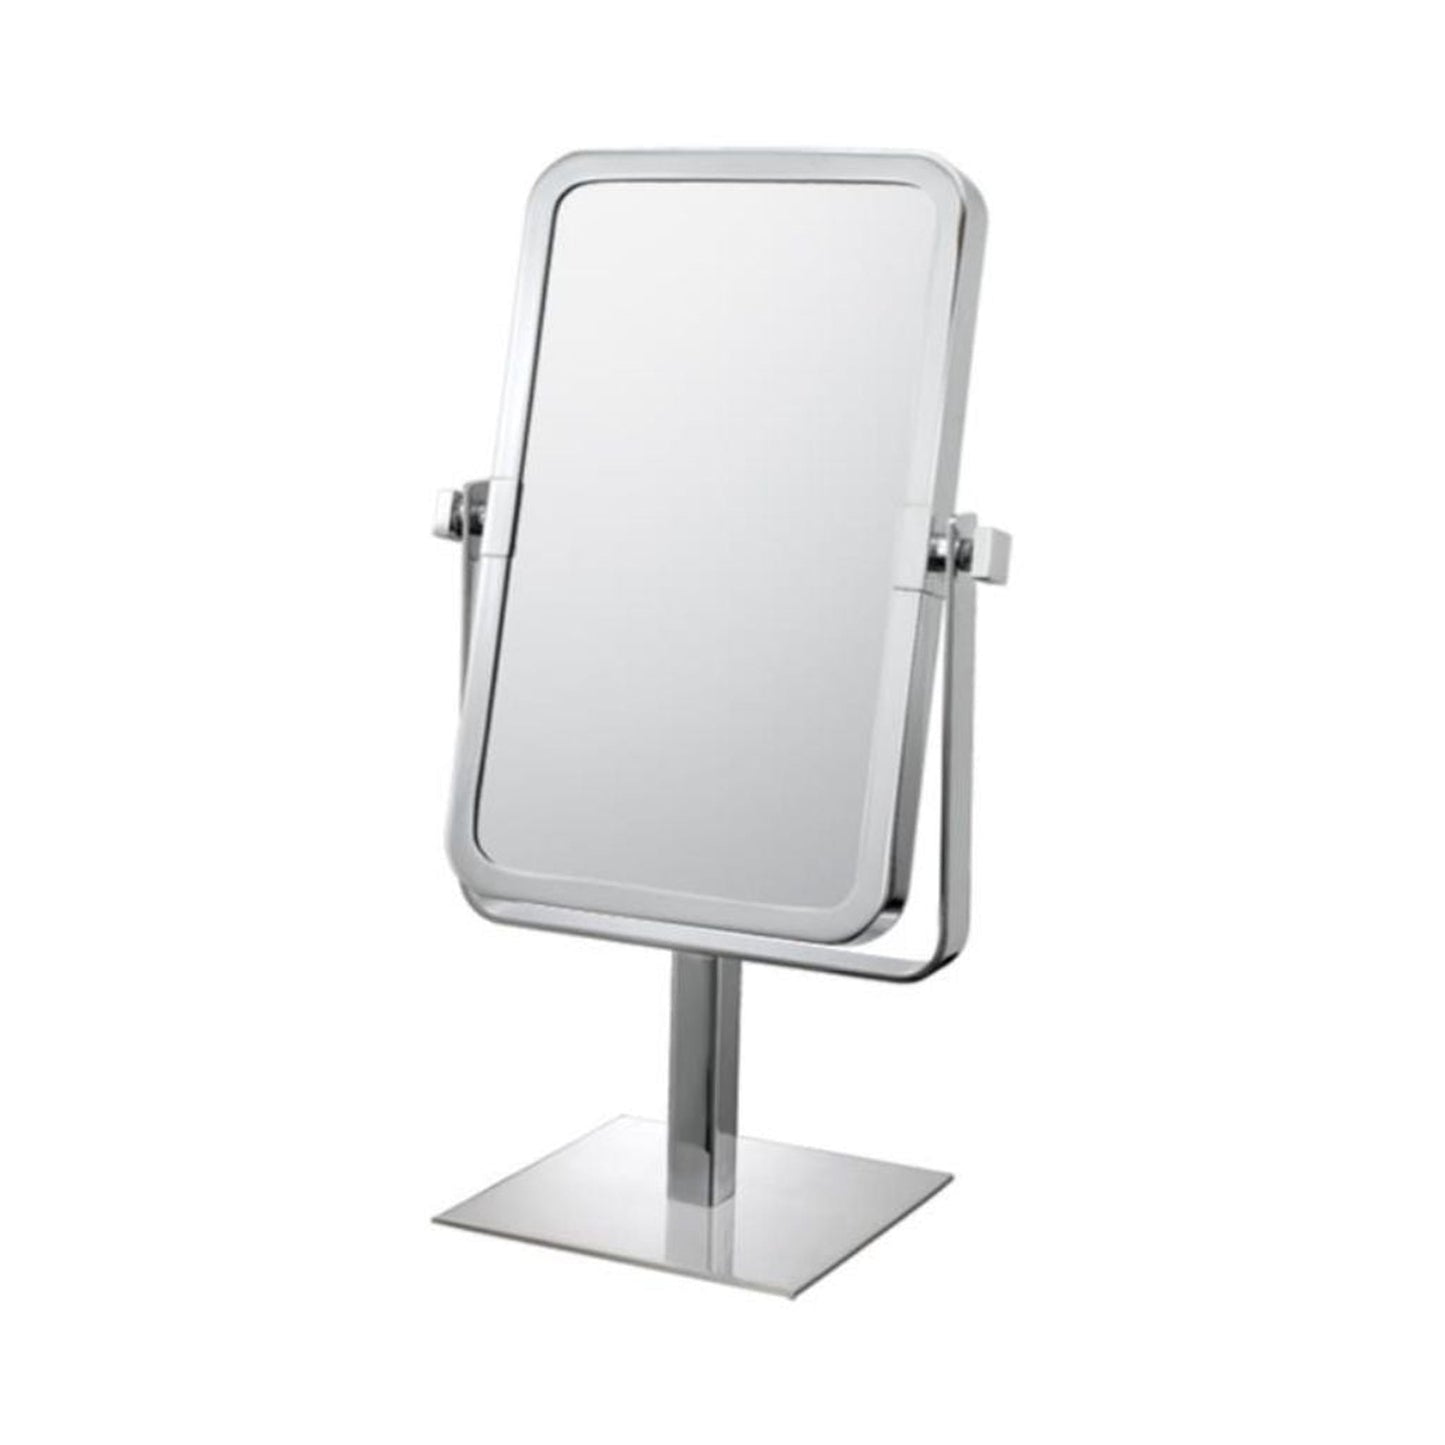 Aptations Mirror Image 8" x 14" Chrome Freestanding Rectangular 1X/3X Magnified Mirror With Square Base